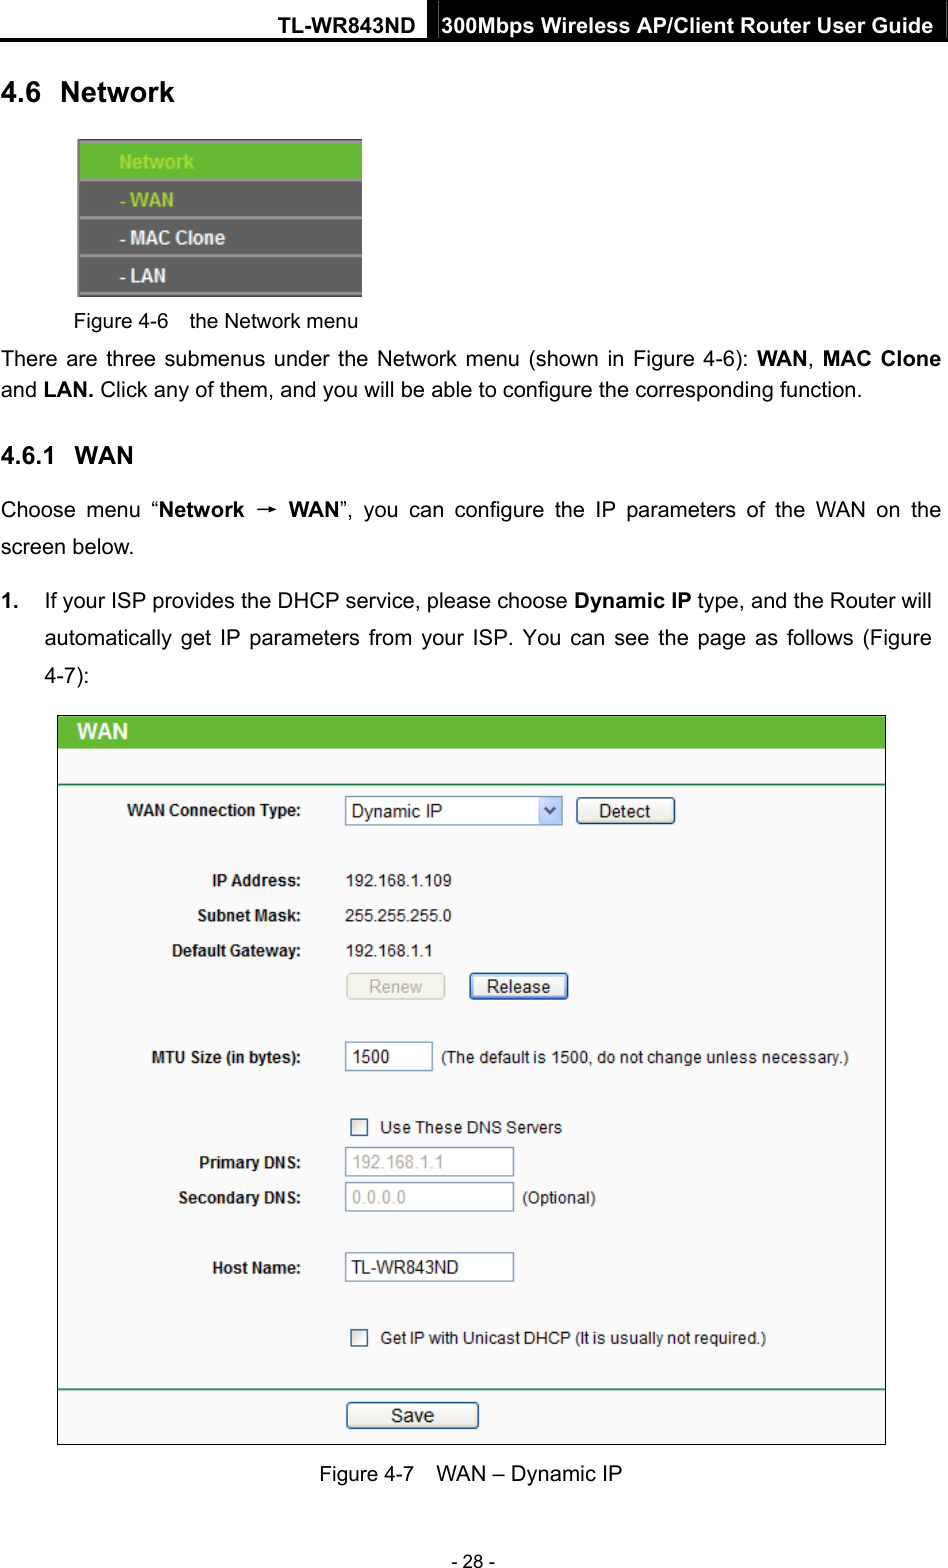 TL-WR843ND 300Mbps Wireless AP/Client Router User Guide - 28 - 4.6  Network  Figure 4-6  the Network menu There are three submenus under the Network menu (shown in Figure 4-6):  WAN, MAC Clone and LAN. Click any of them, and you will be able to configure the corresponding function.   4.6.1  WAN Choose menu “Network  → WAN”, you can configure the IP parameters of the WAN on the screen below. 1.  If your ISP provides the DHCP service, please choose Dynamic IP type, and the Router will automatically get IP parameters from your ISP. You can see the page as follows (Figure 4-7):  Figure 4-7    WAN – Dynamic IP 